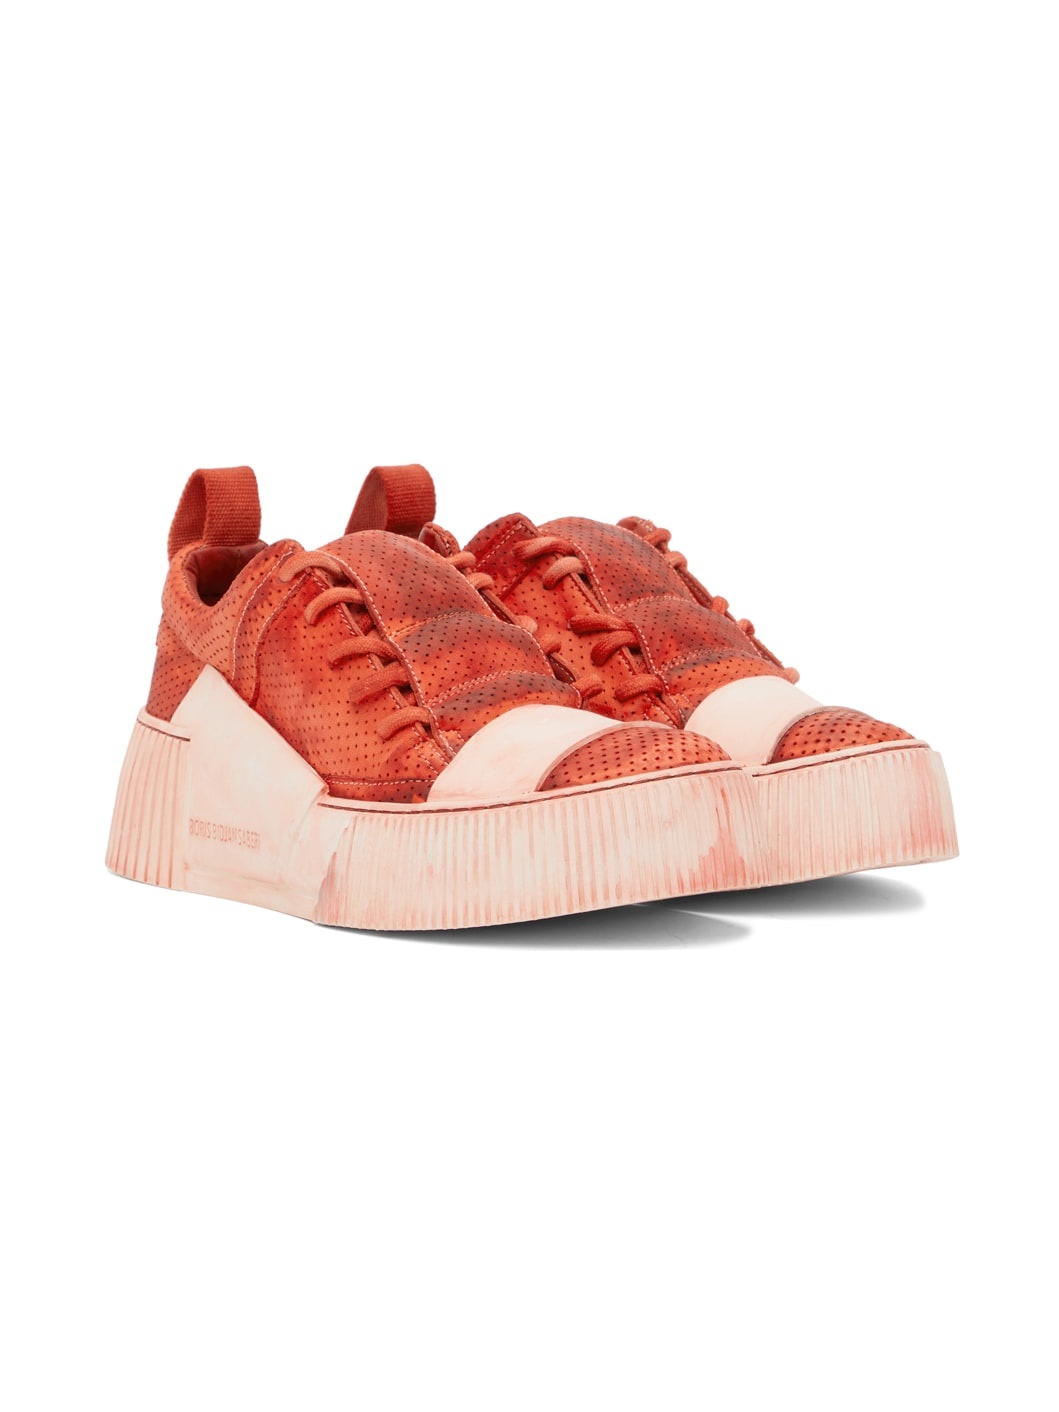 SSENSE Exclusive Red Bamba 2.1 Sneakers - 4